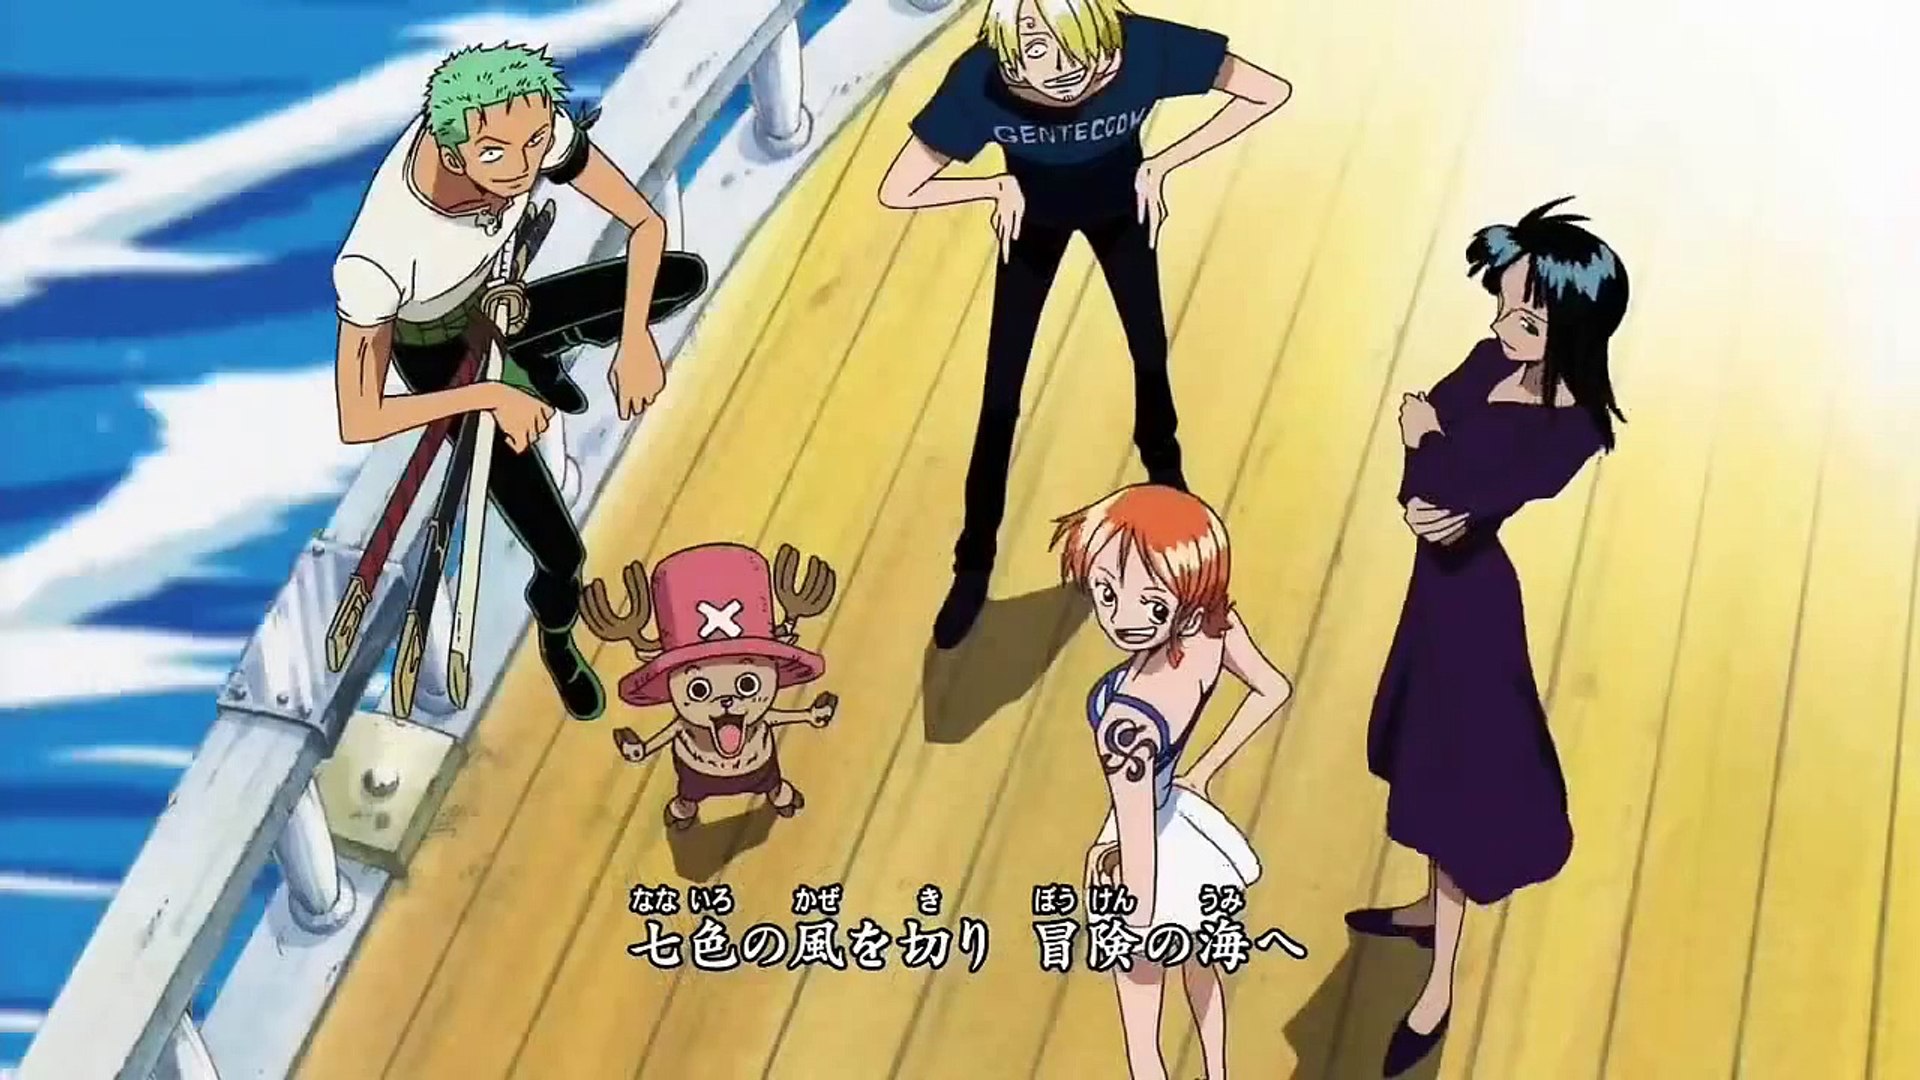 One Piece Opening 5 (Kokoro no Chizu - Boystyle) by Portgas D. Ace